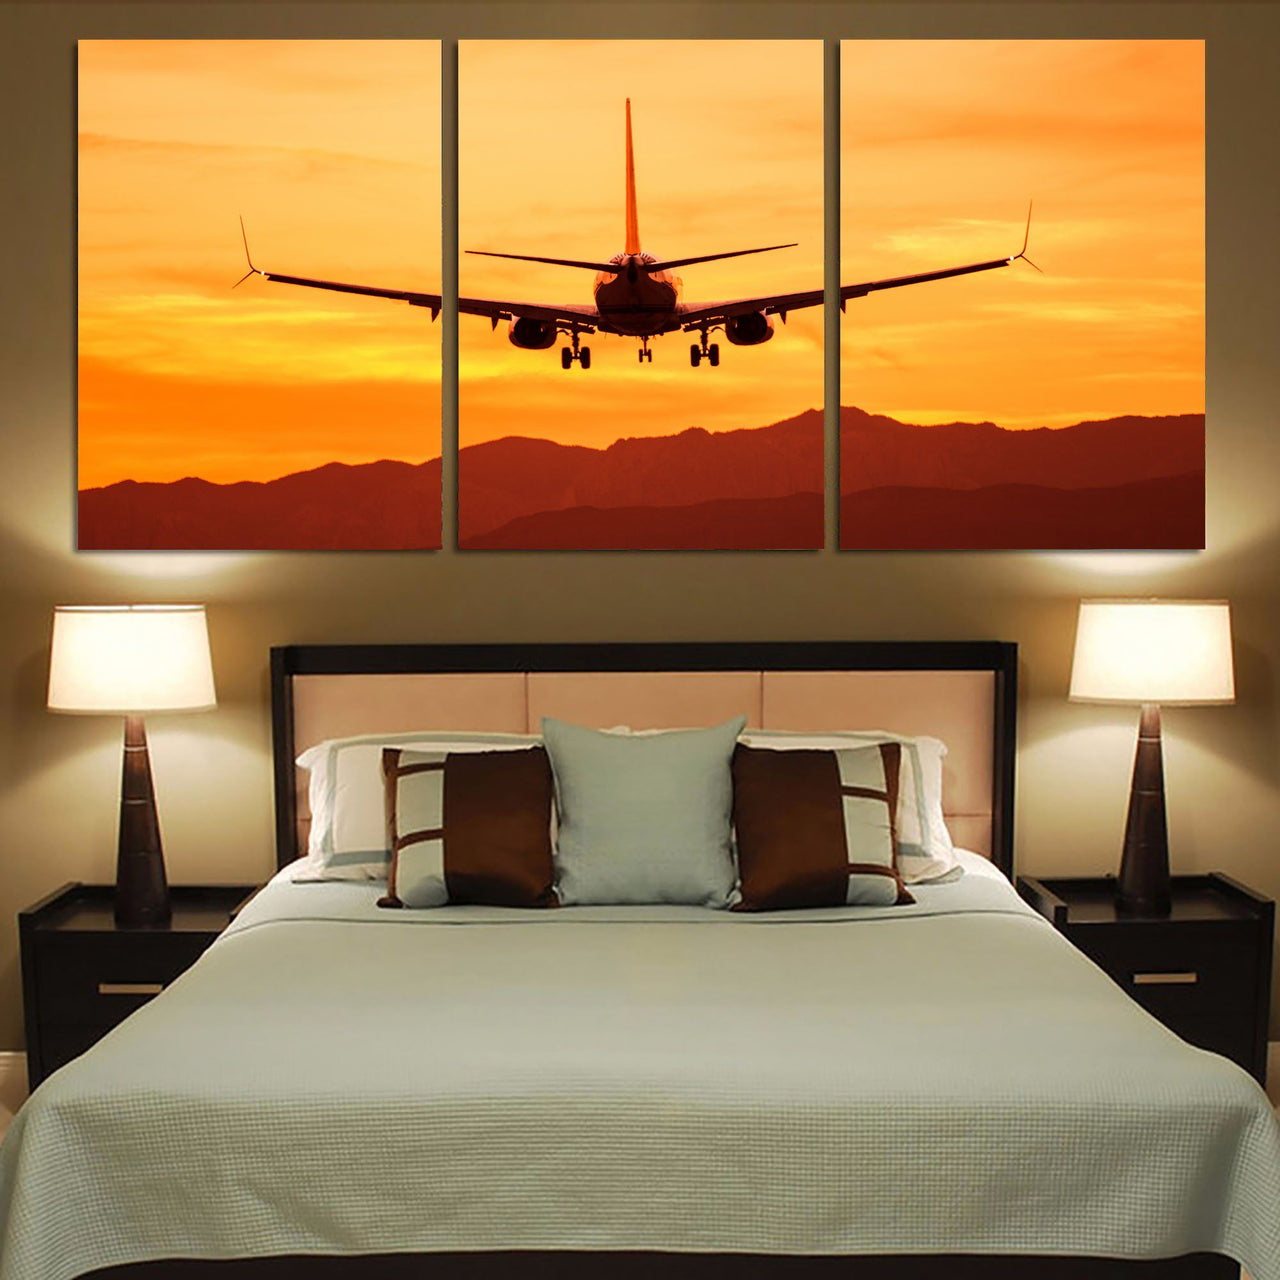 Landing Aircraft During Sunset Printed Canvas Posters (3 Pieces) Aviation Shop 